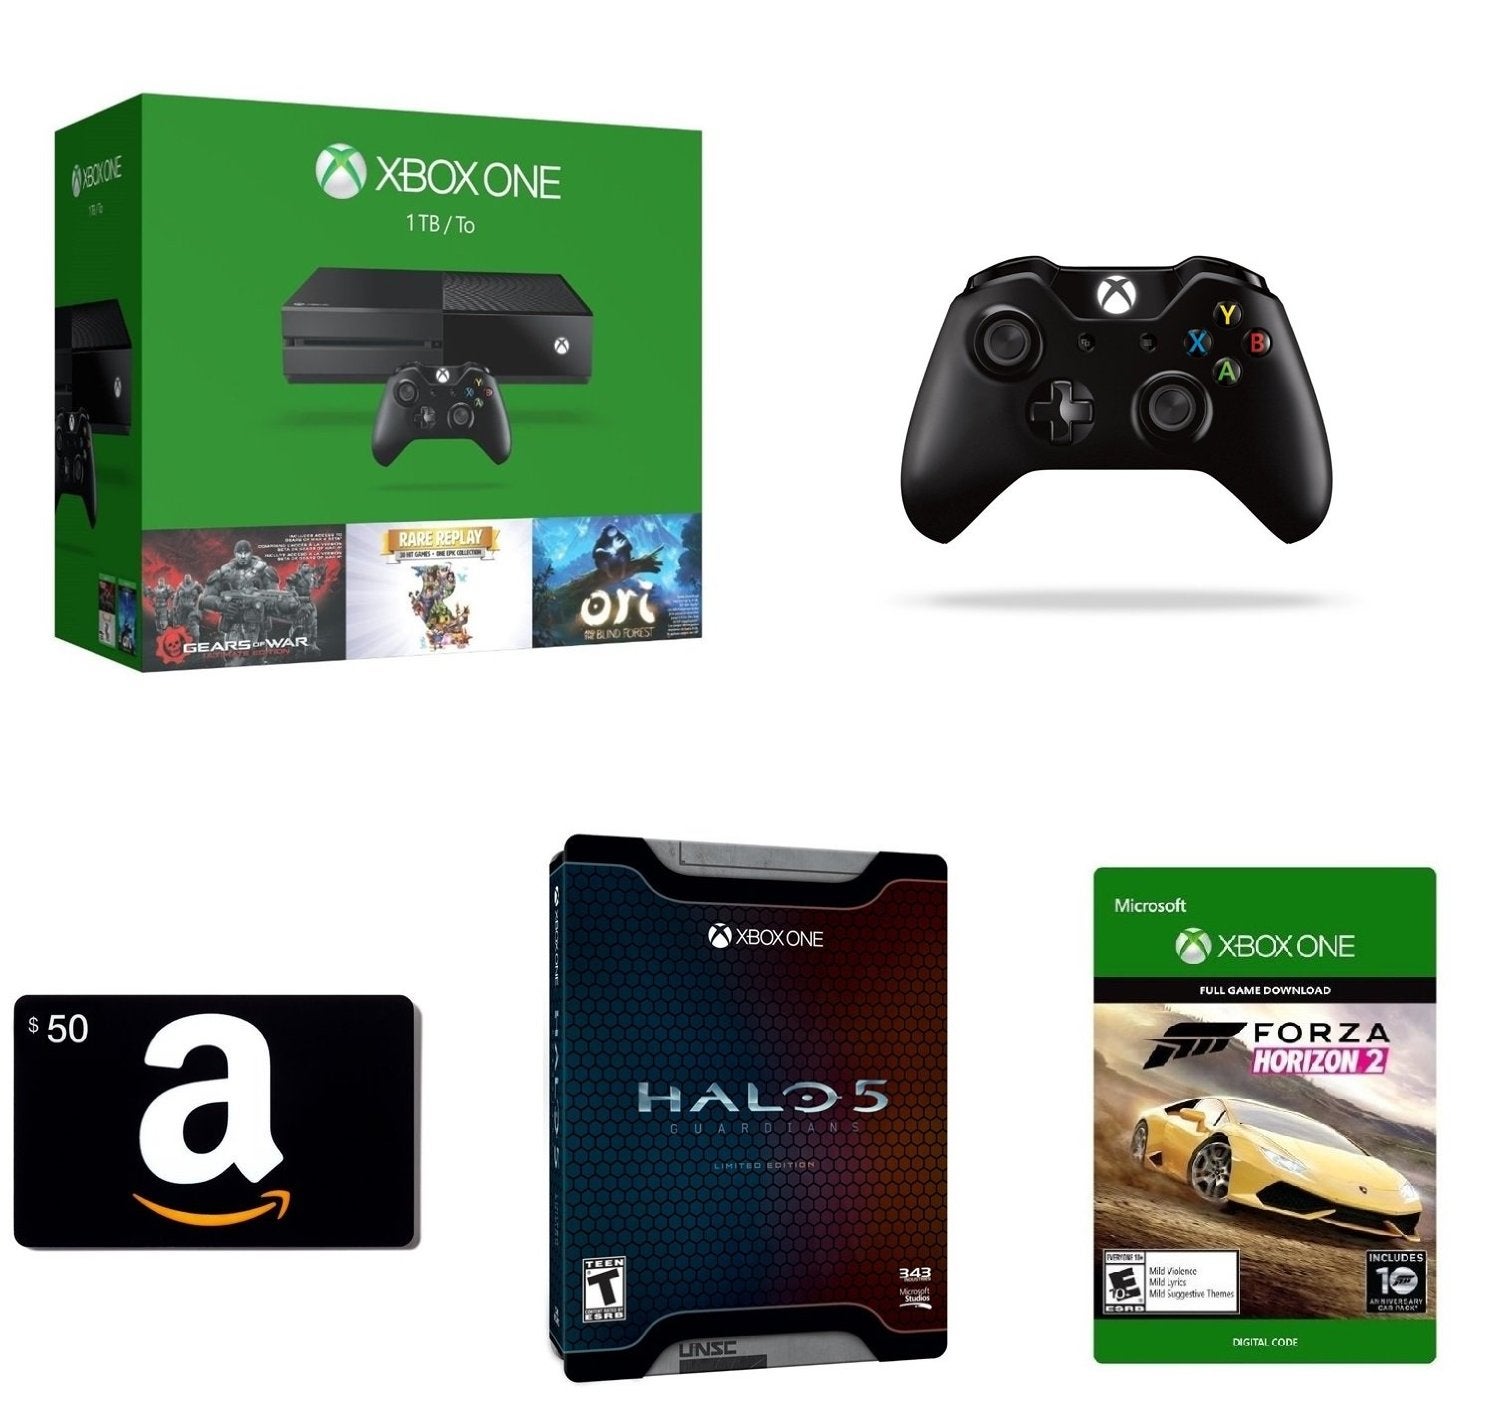 Image for Xbox One deal gets you five games, extra controller, $50 gift card for $370